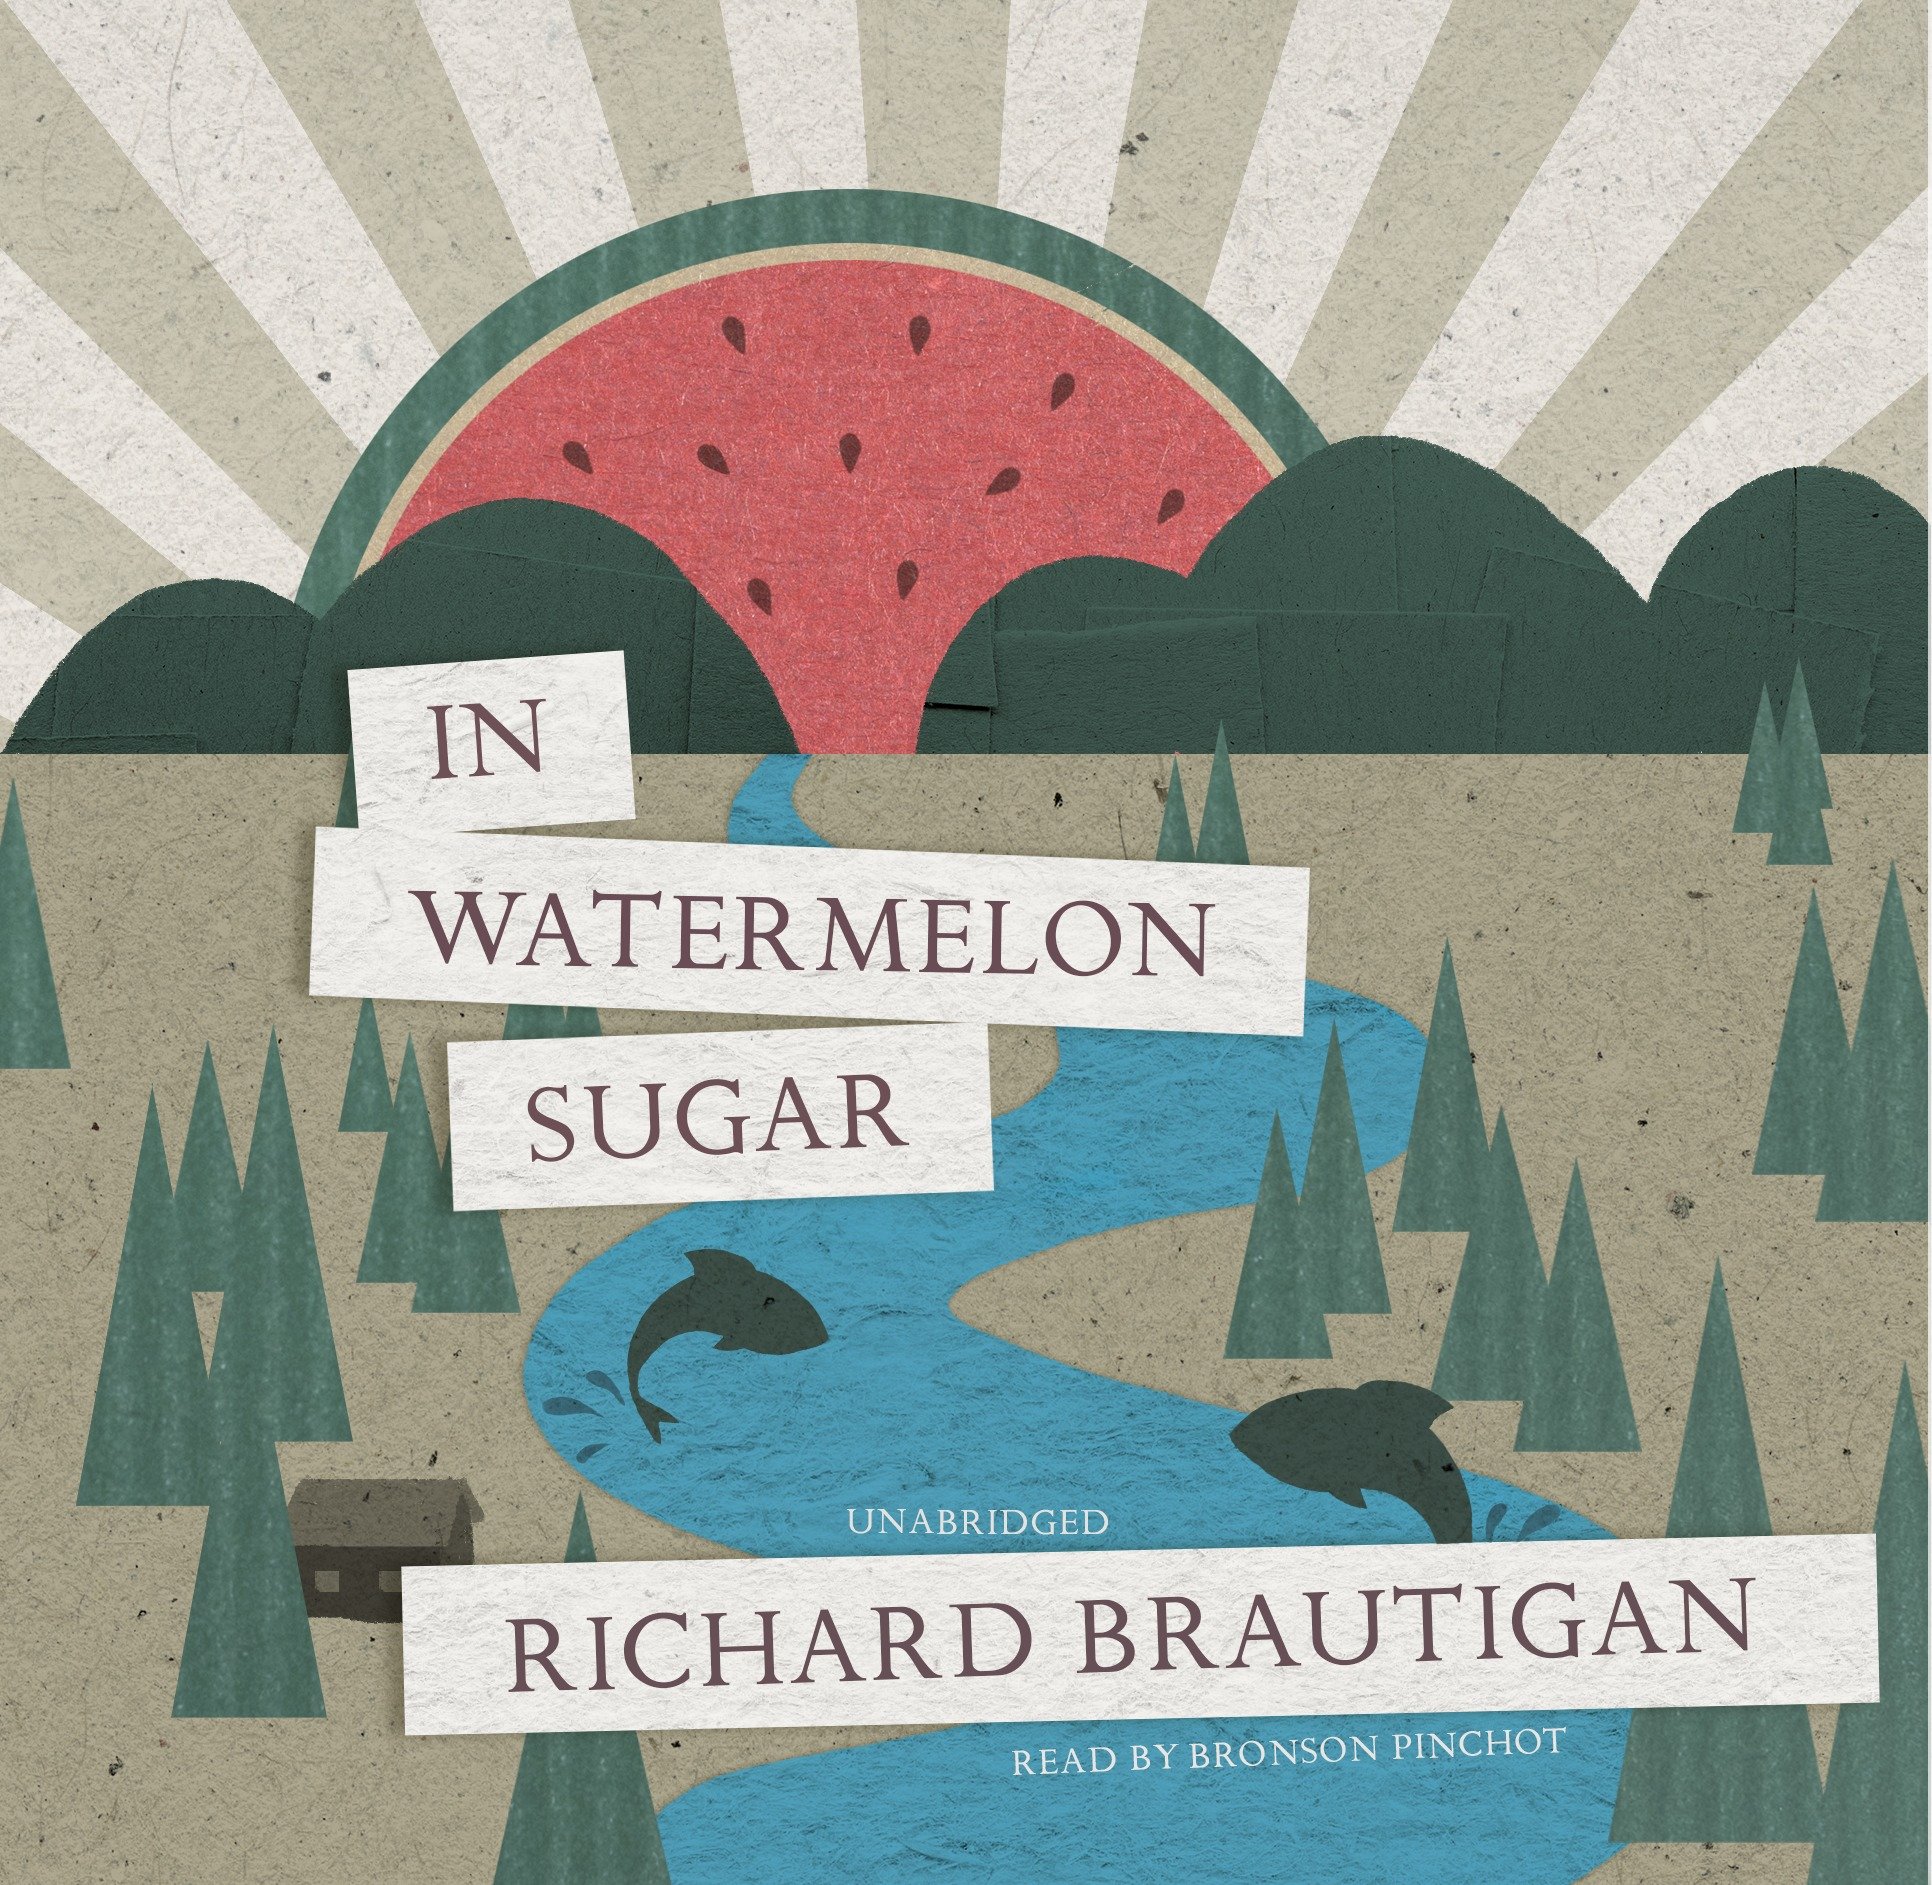 Frontlist Book | Harry Styles’ “Watermelon Sugar” Is Based On Your Favorite Boomer-Dad Novel